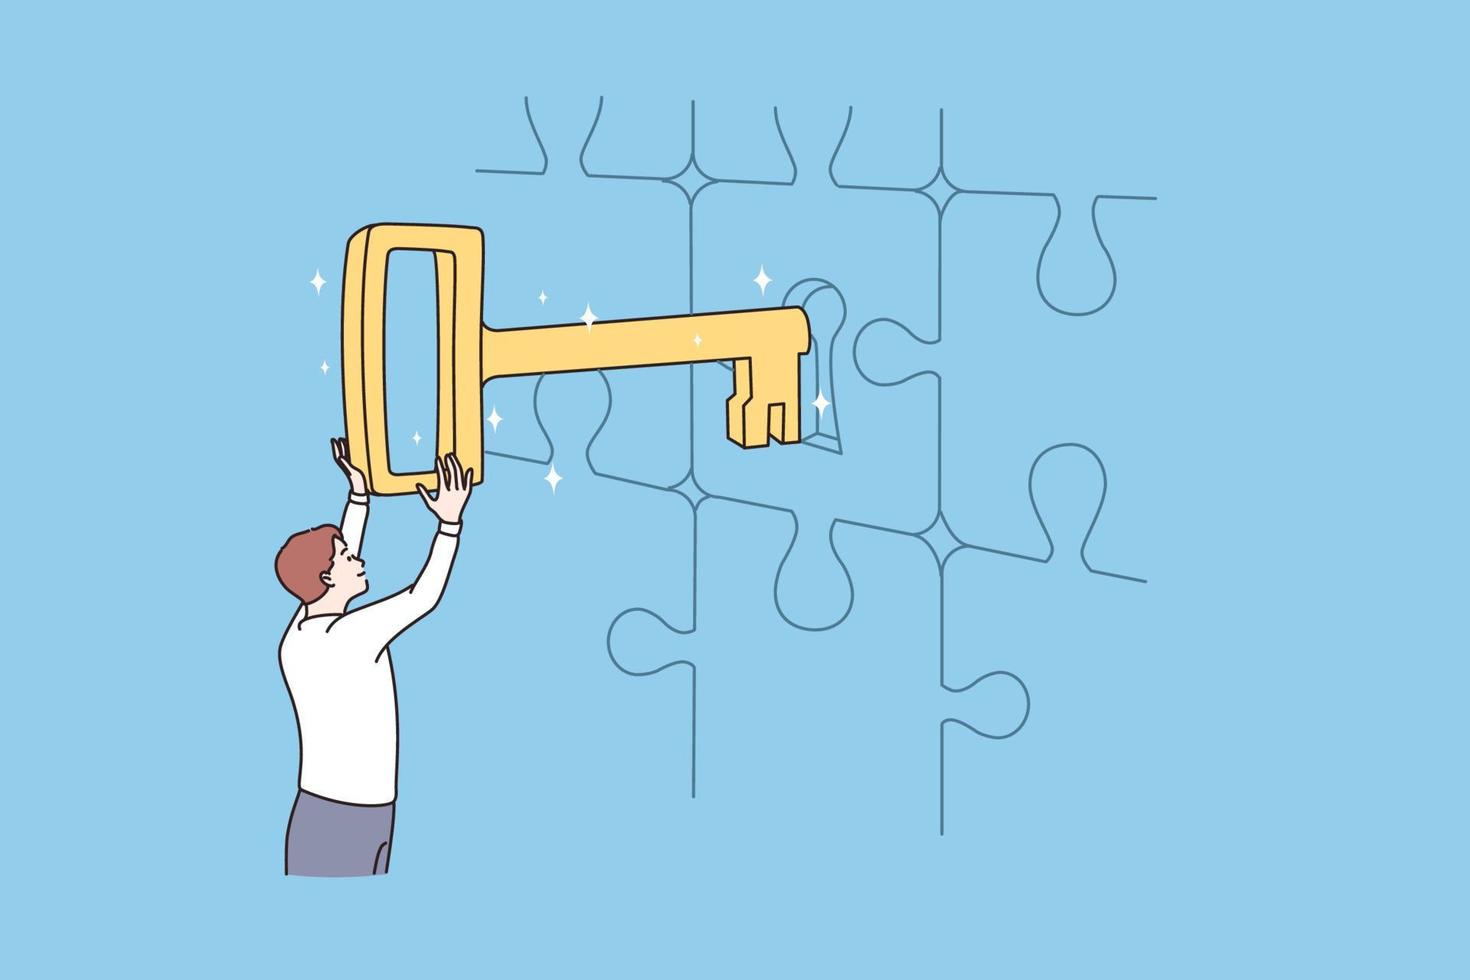 Business key, solution and success concept. Young businessman standing opening puzzle door with golden key achieving goal alone vector illustration